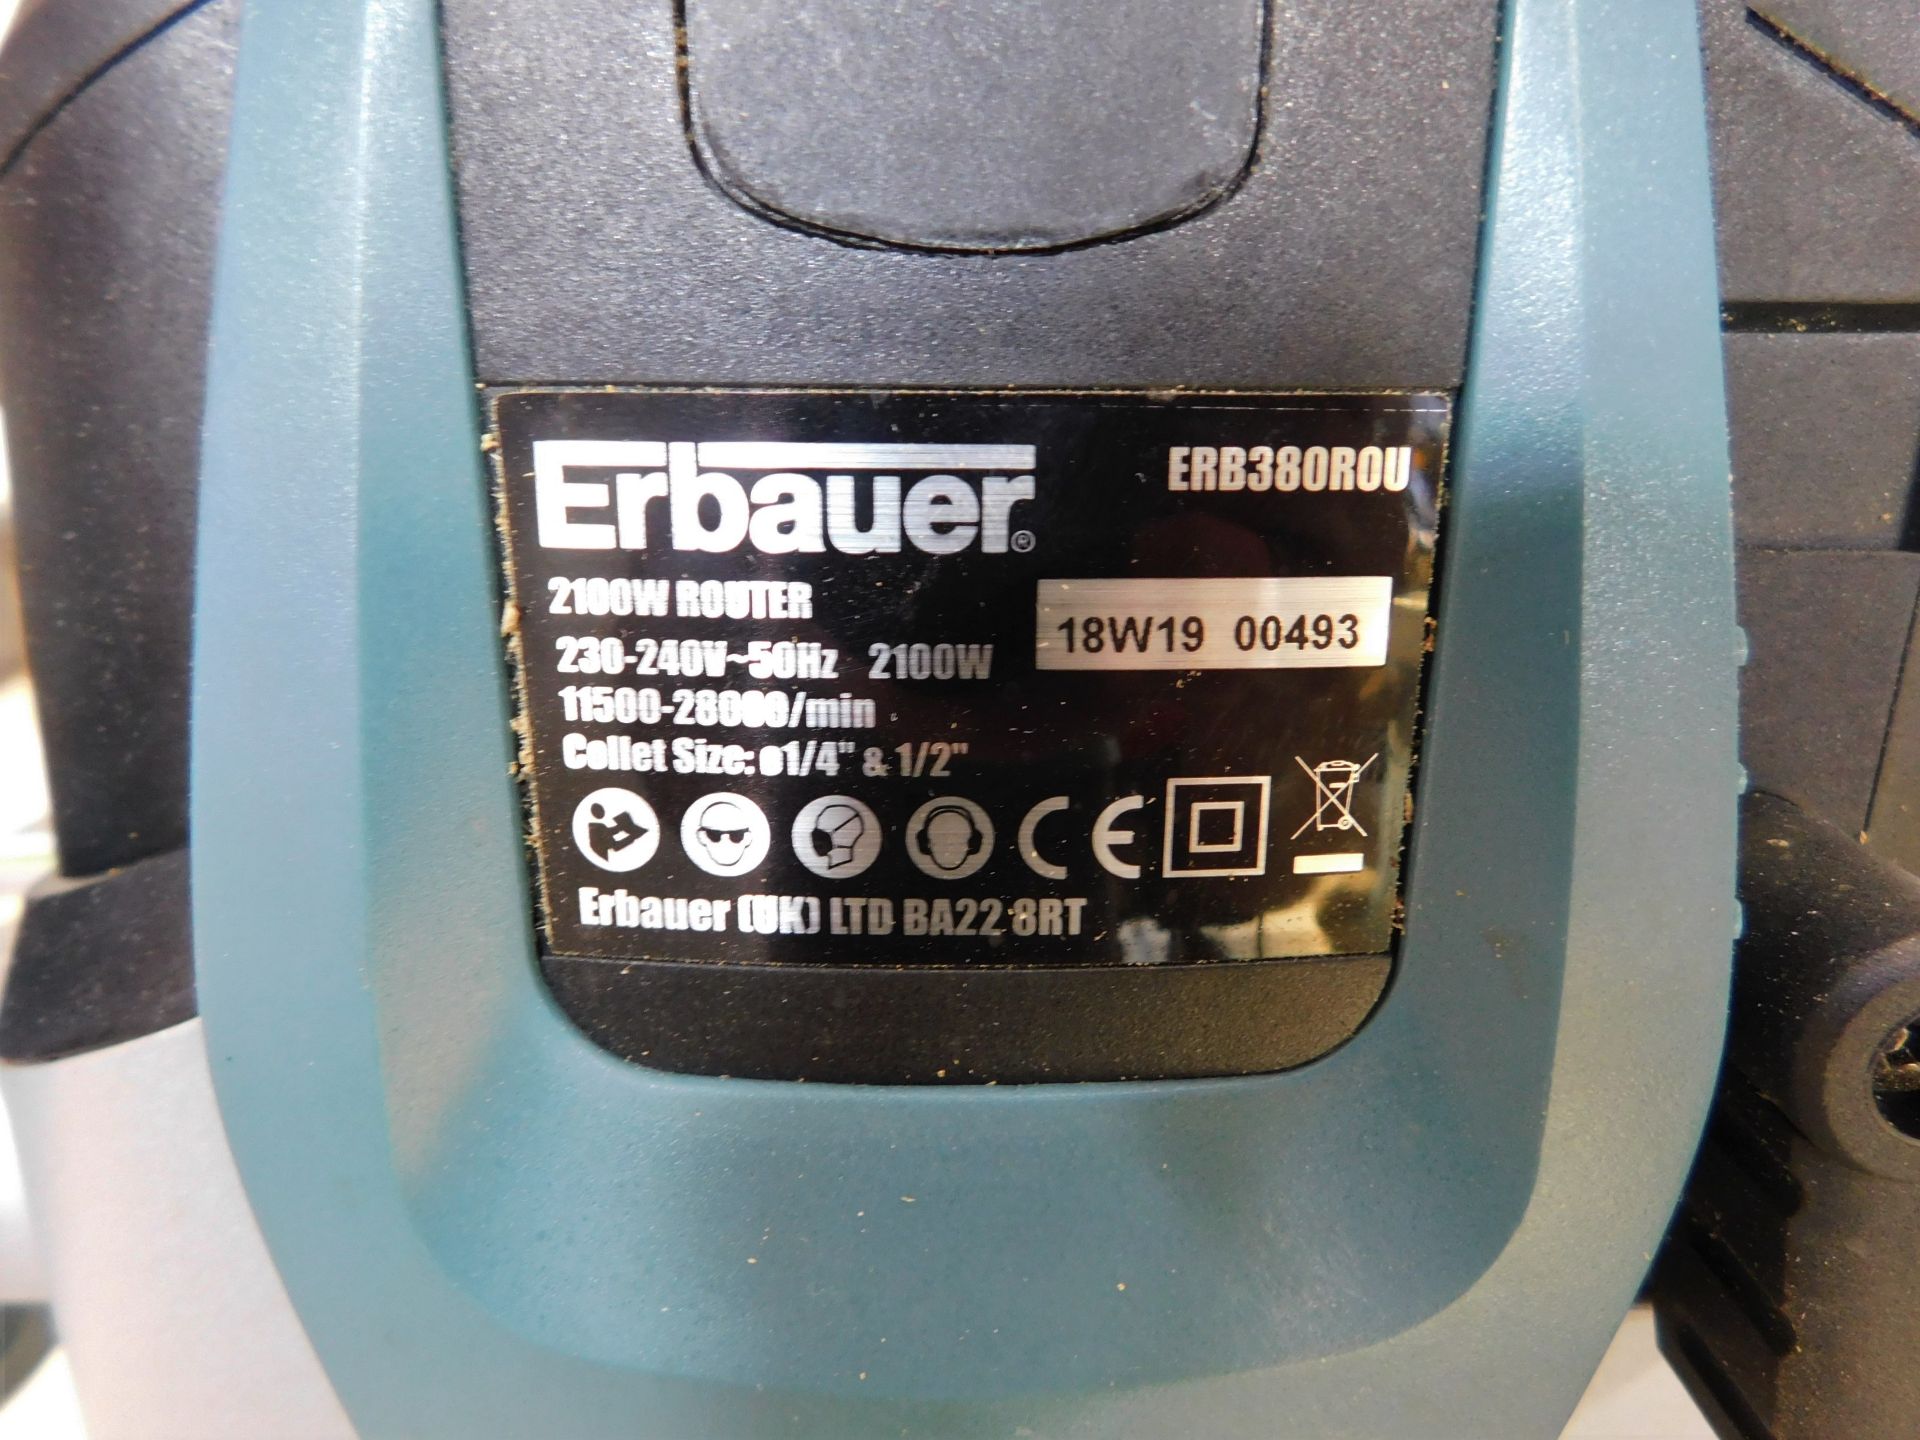 Erbauer ERB380ROU 2100w Router, 240v (Location: Brentwood. Please Refer to General Notes) - Image 2 of 3